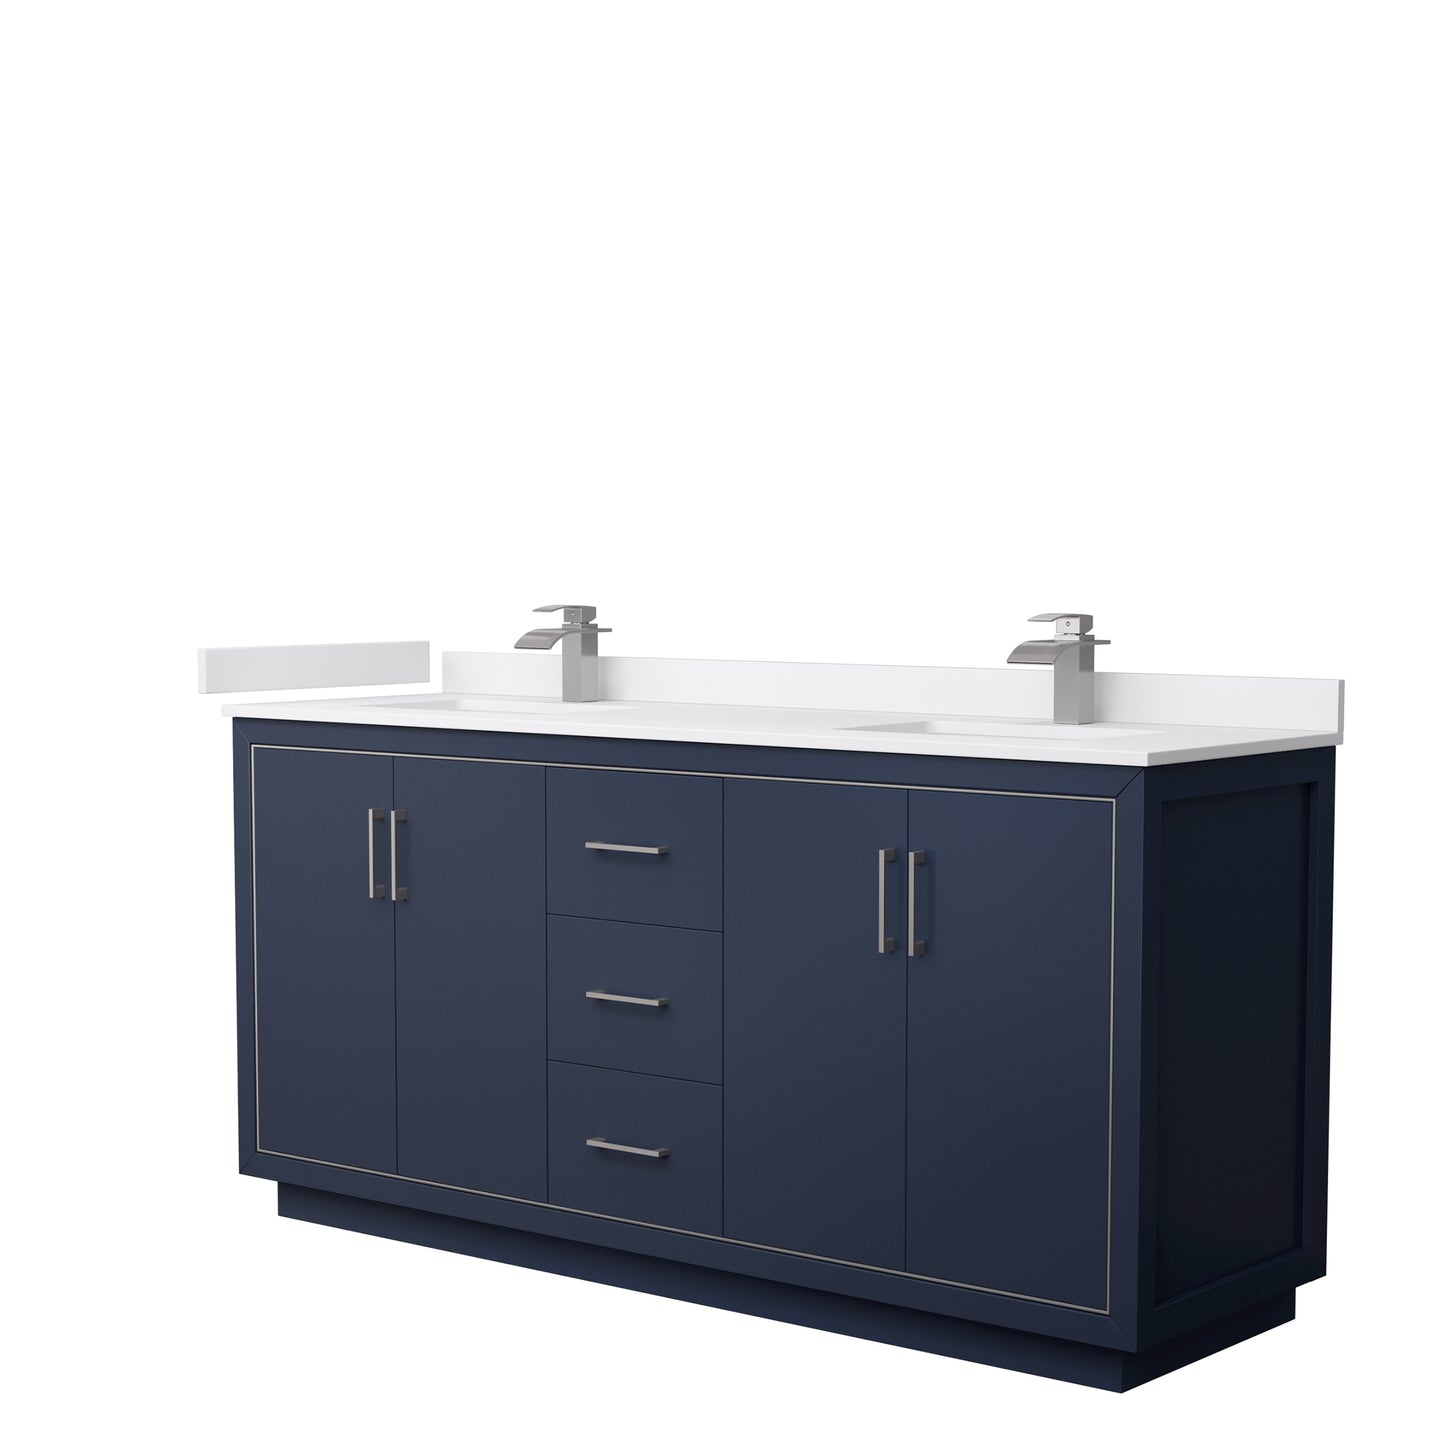 Wyndham Icon 72 Inch Double Bathroom Vanity White Cultured Marble Countertop with Undermount Square Sinks and Brushed Nickel Trim - Luxe Bathroom Vanities